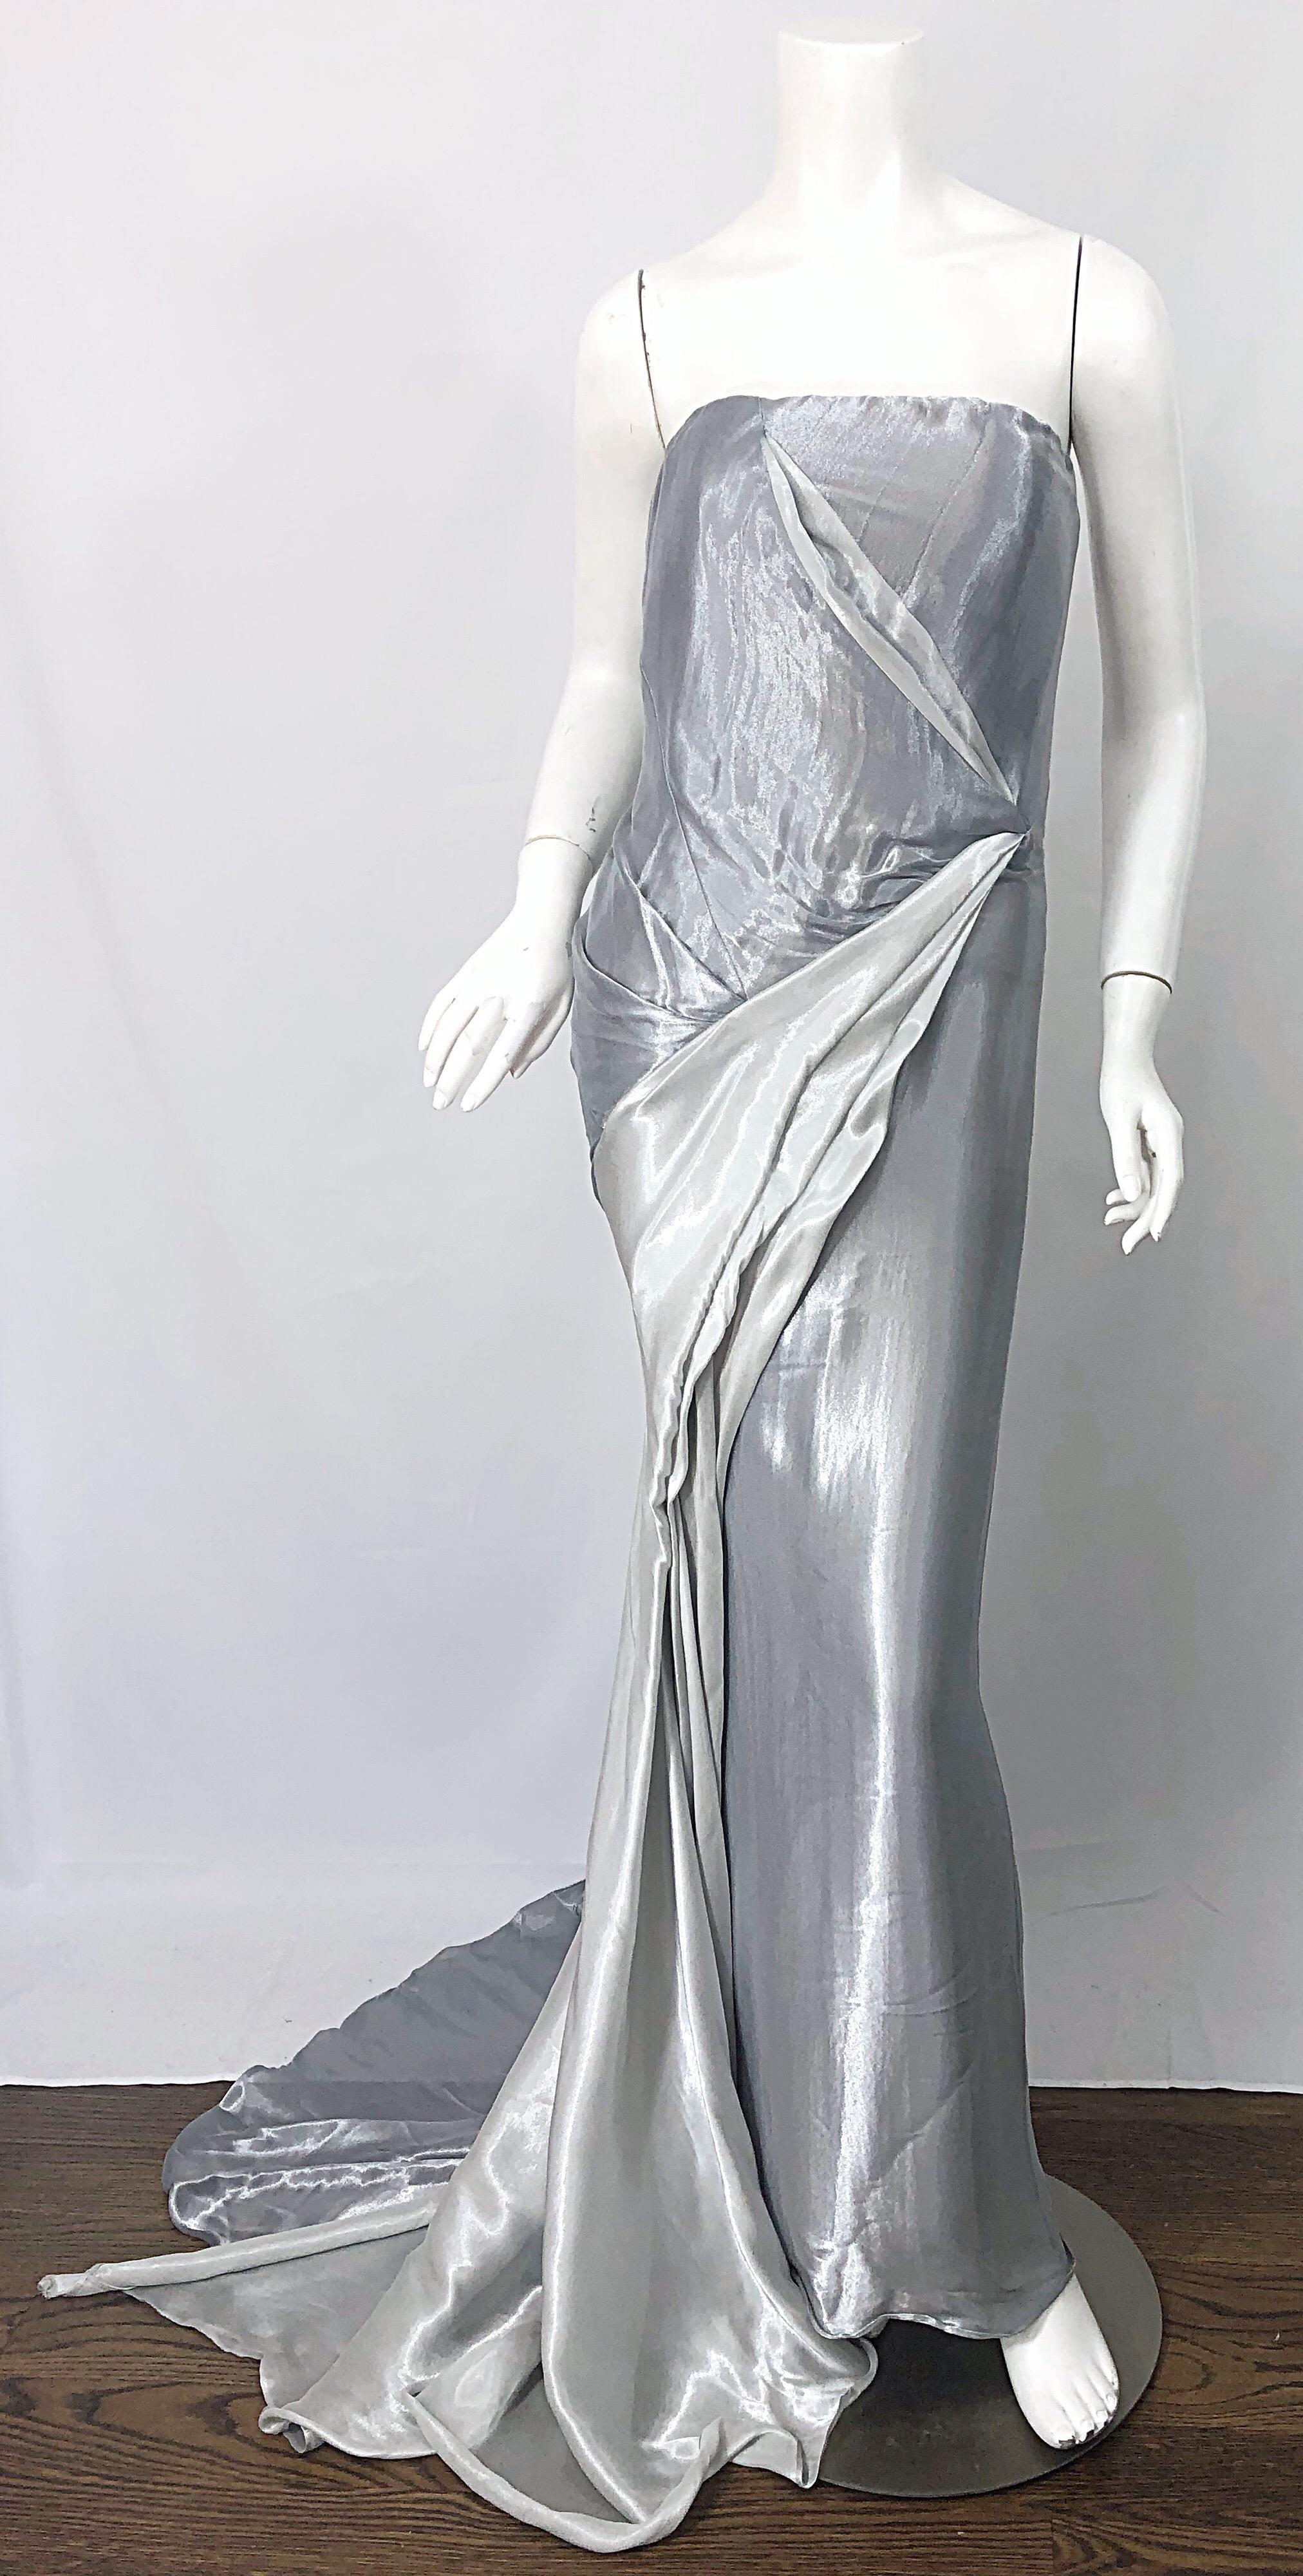 Gorgeous vintage DONNA KARAN silver metallic strapless Grecian gown! Features a boned fitted bodice, with flattering drapes and gathers throughout. Hidden zipper up the back with hook-and-eye closure. Fantastic long train. The perfect evening dress